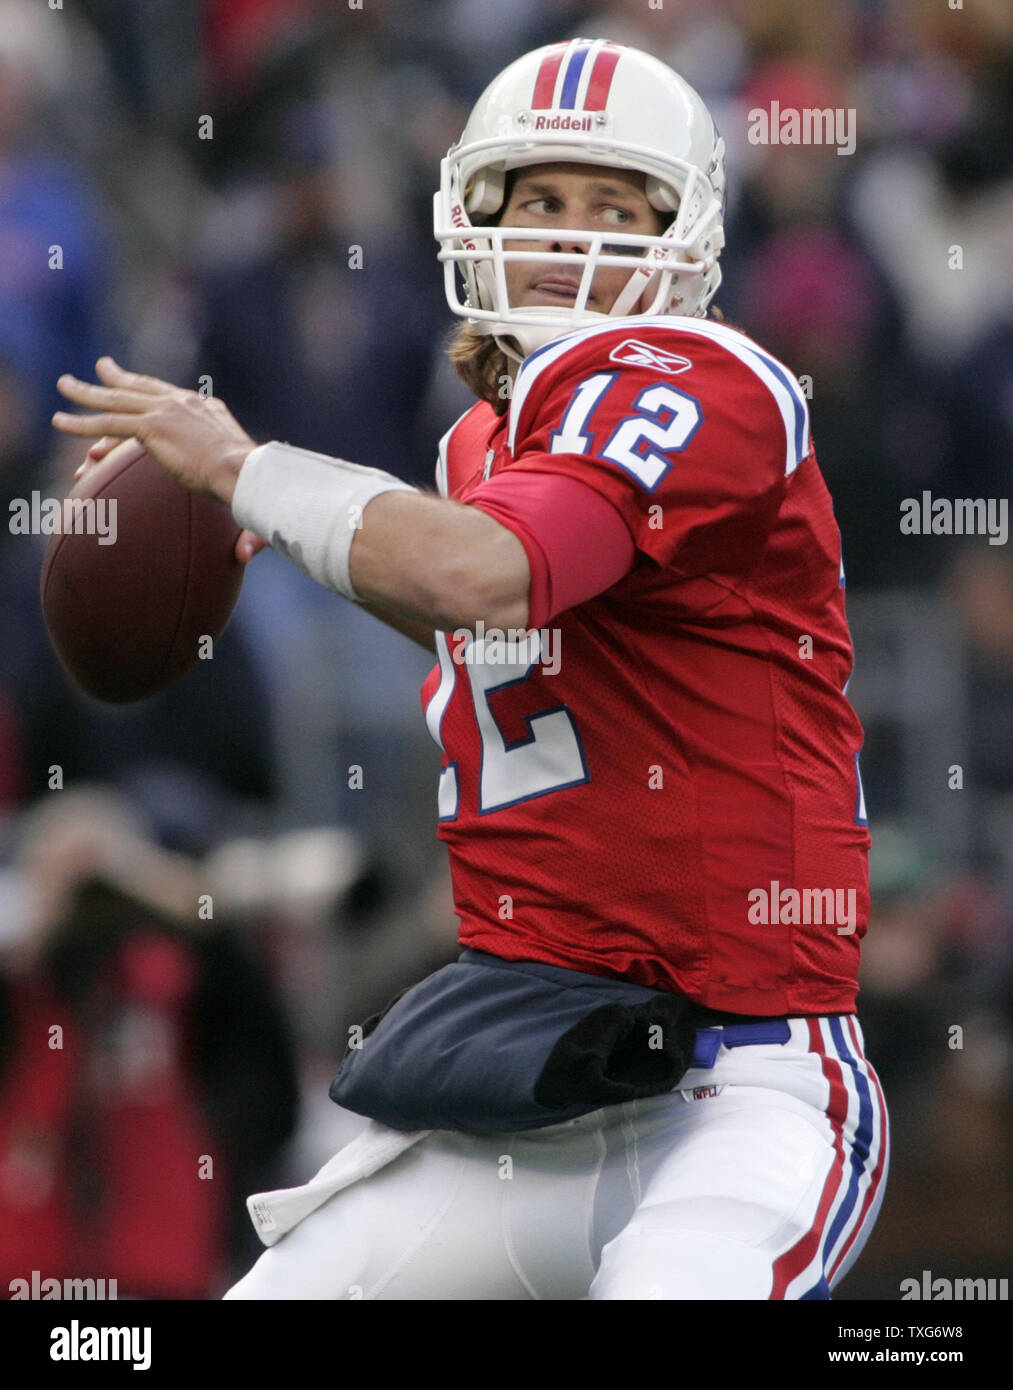 New England Patriots quarterback Tom Brady drops back for a pass in the first quarter against the Minnesota Vikings at Gillette Stadium in Foxboro, Massachusetts on October 31, 2010.  UPI/Matthew Healey Stock Photo